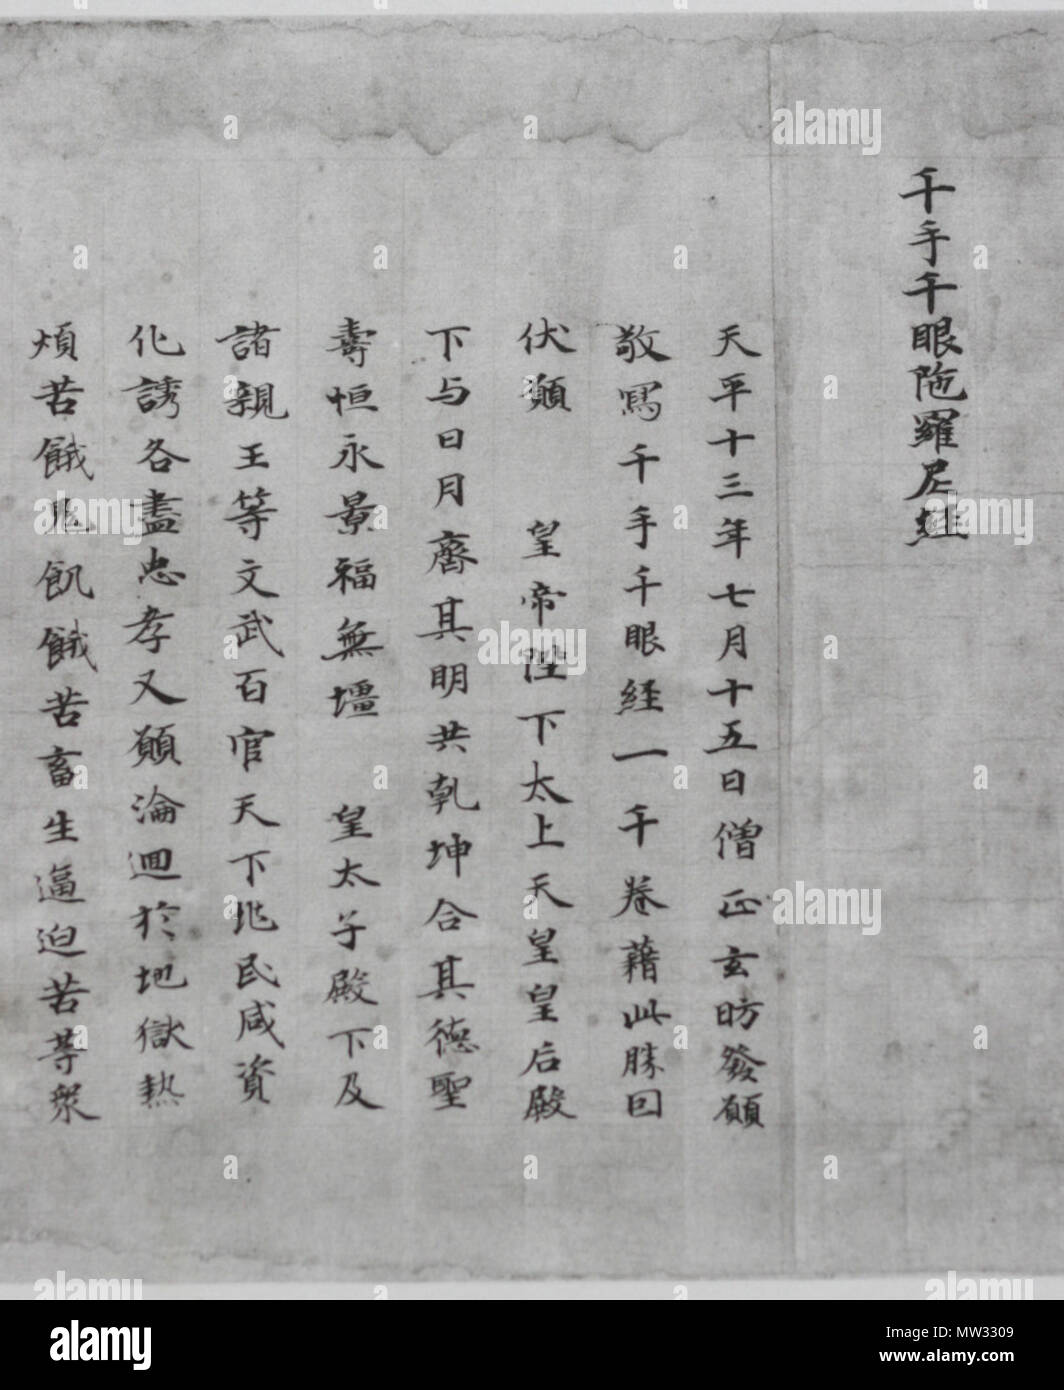 . English: Last part. ACE741, Total scroll is a segment of the Senju sengen daranikyo Sutra, ACE741 Only extant portion of one thousand copies of the Senju sengen daranikyo made under sponsorship of bishop Genbo. Mentioned in the Essential Records of Todai-ji. 109lines, opening part is lost. Kyoto National Museum, Kyoto, Japan 日本語: 千手千眼陀羅尼経、残巻、旧守屋孝蔵コレクション、京都国立博物館 . ACE741. Unknown 551 Senjyu Sengan Daranhi Kyohaku Stock Photo